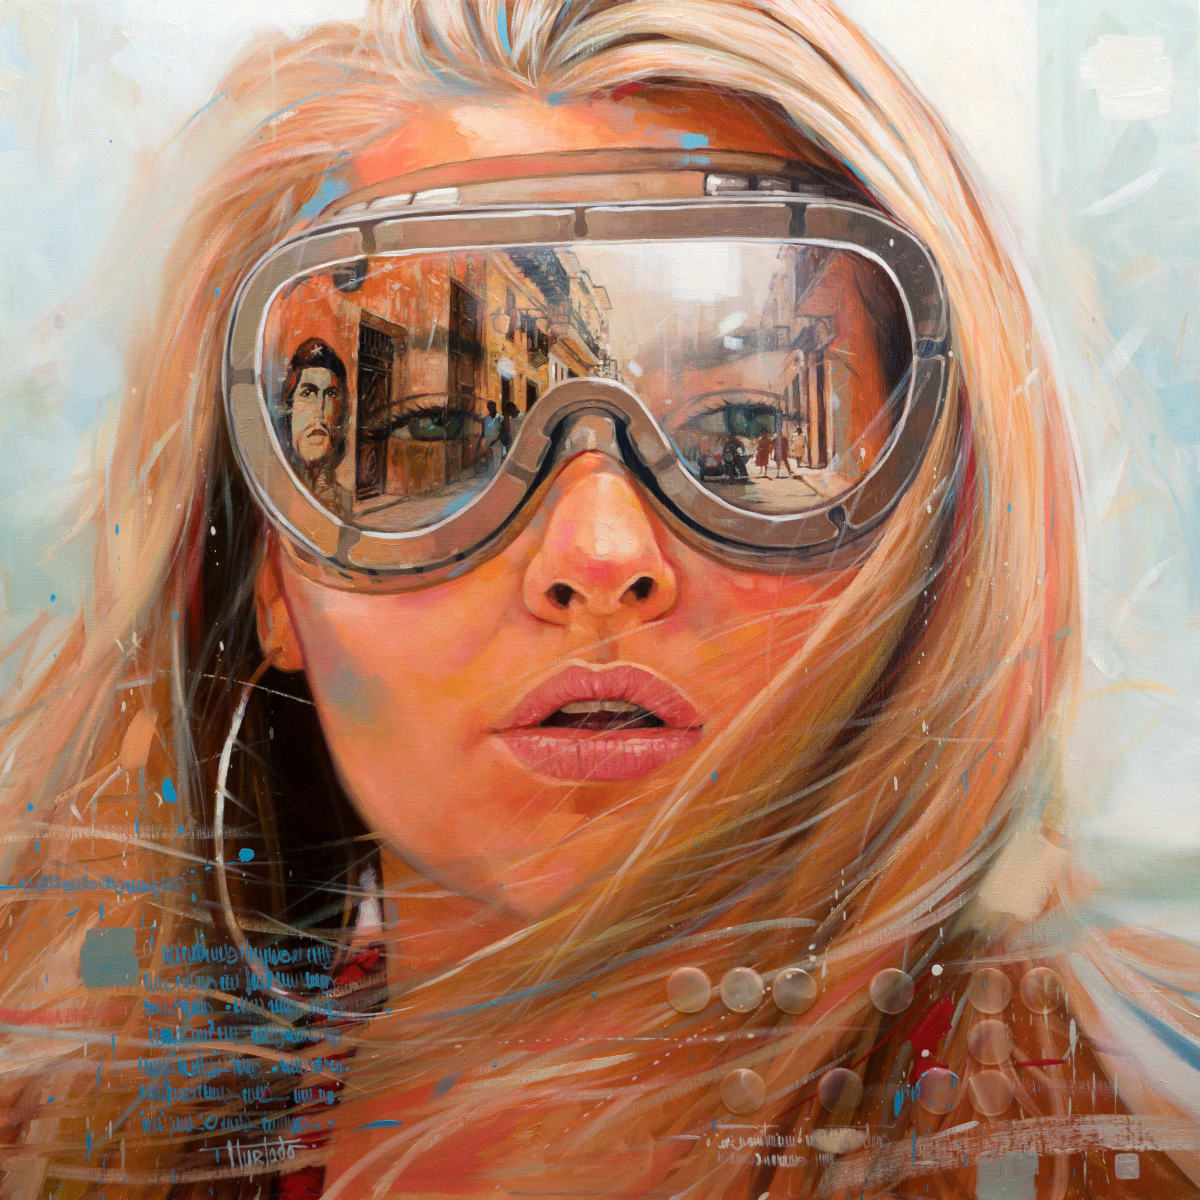 "Immersed in time" by Yunior Hurtado Torres  Image: "Immersed in time"